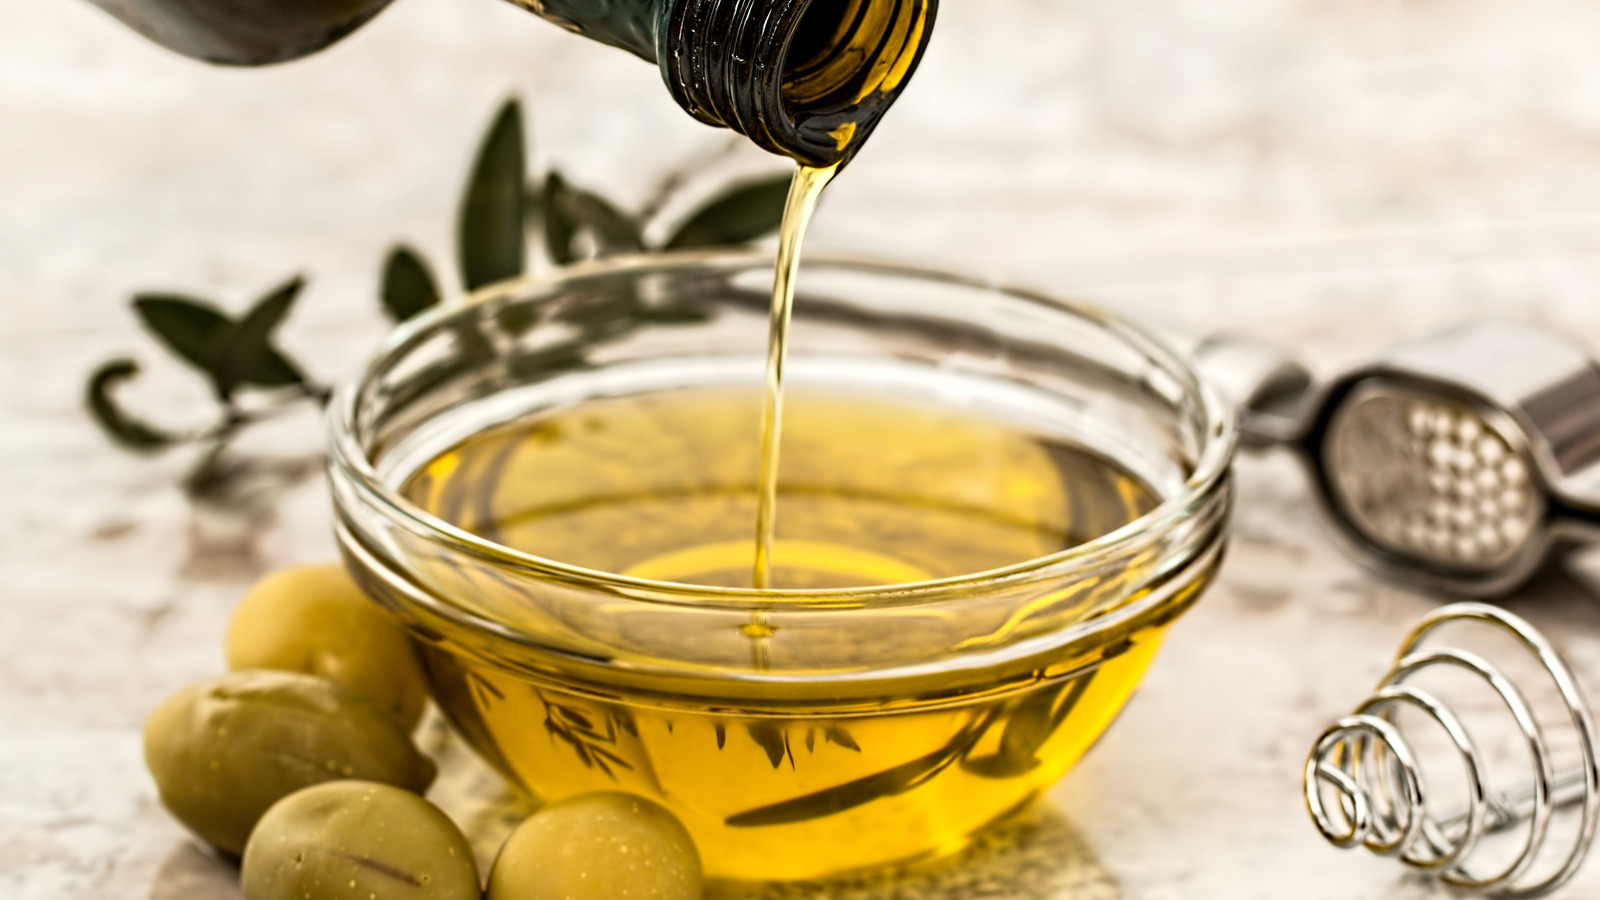 Here's Why Olive Oil Is So Expensive - Tasting Table